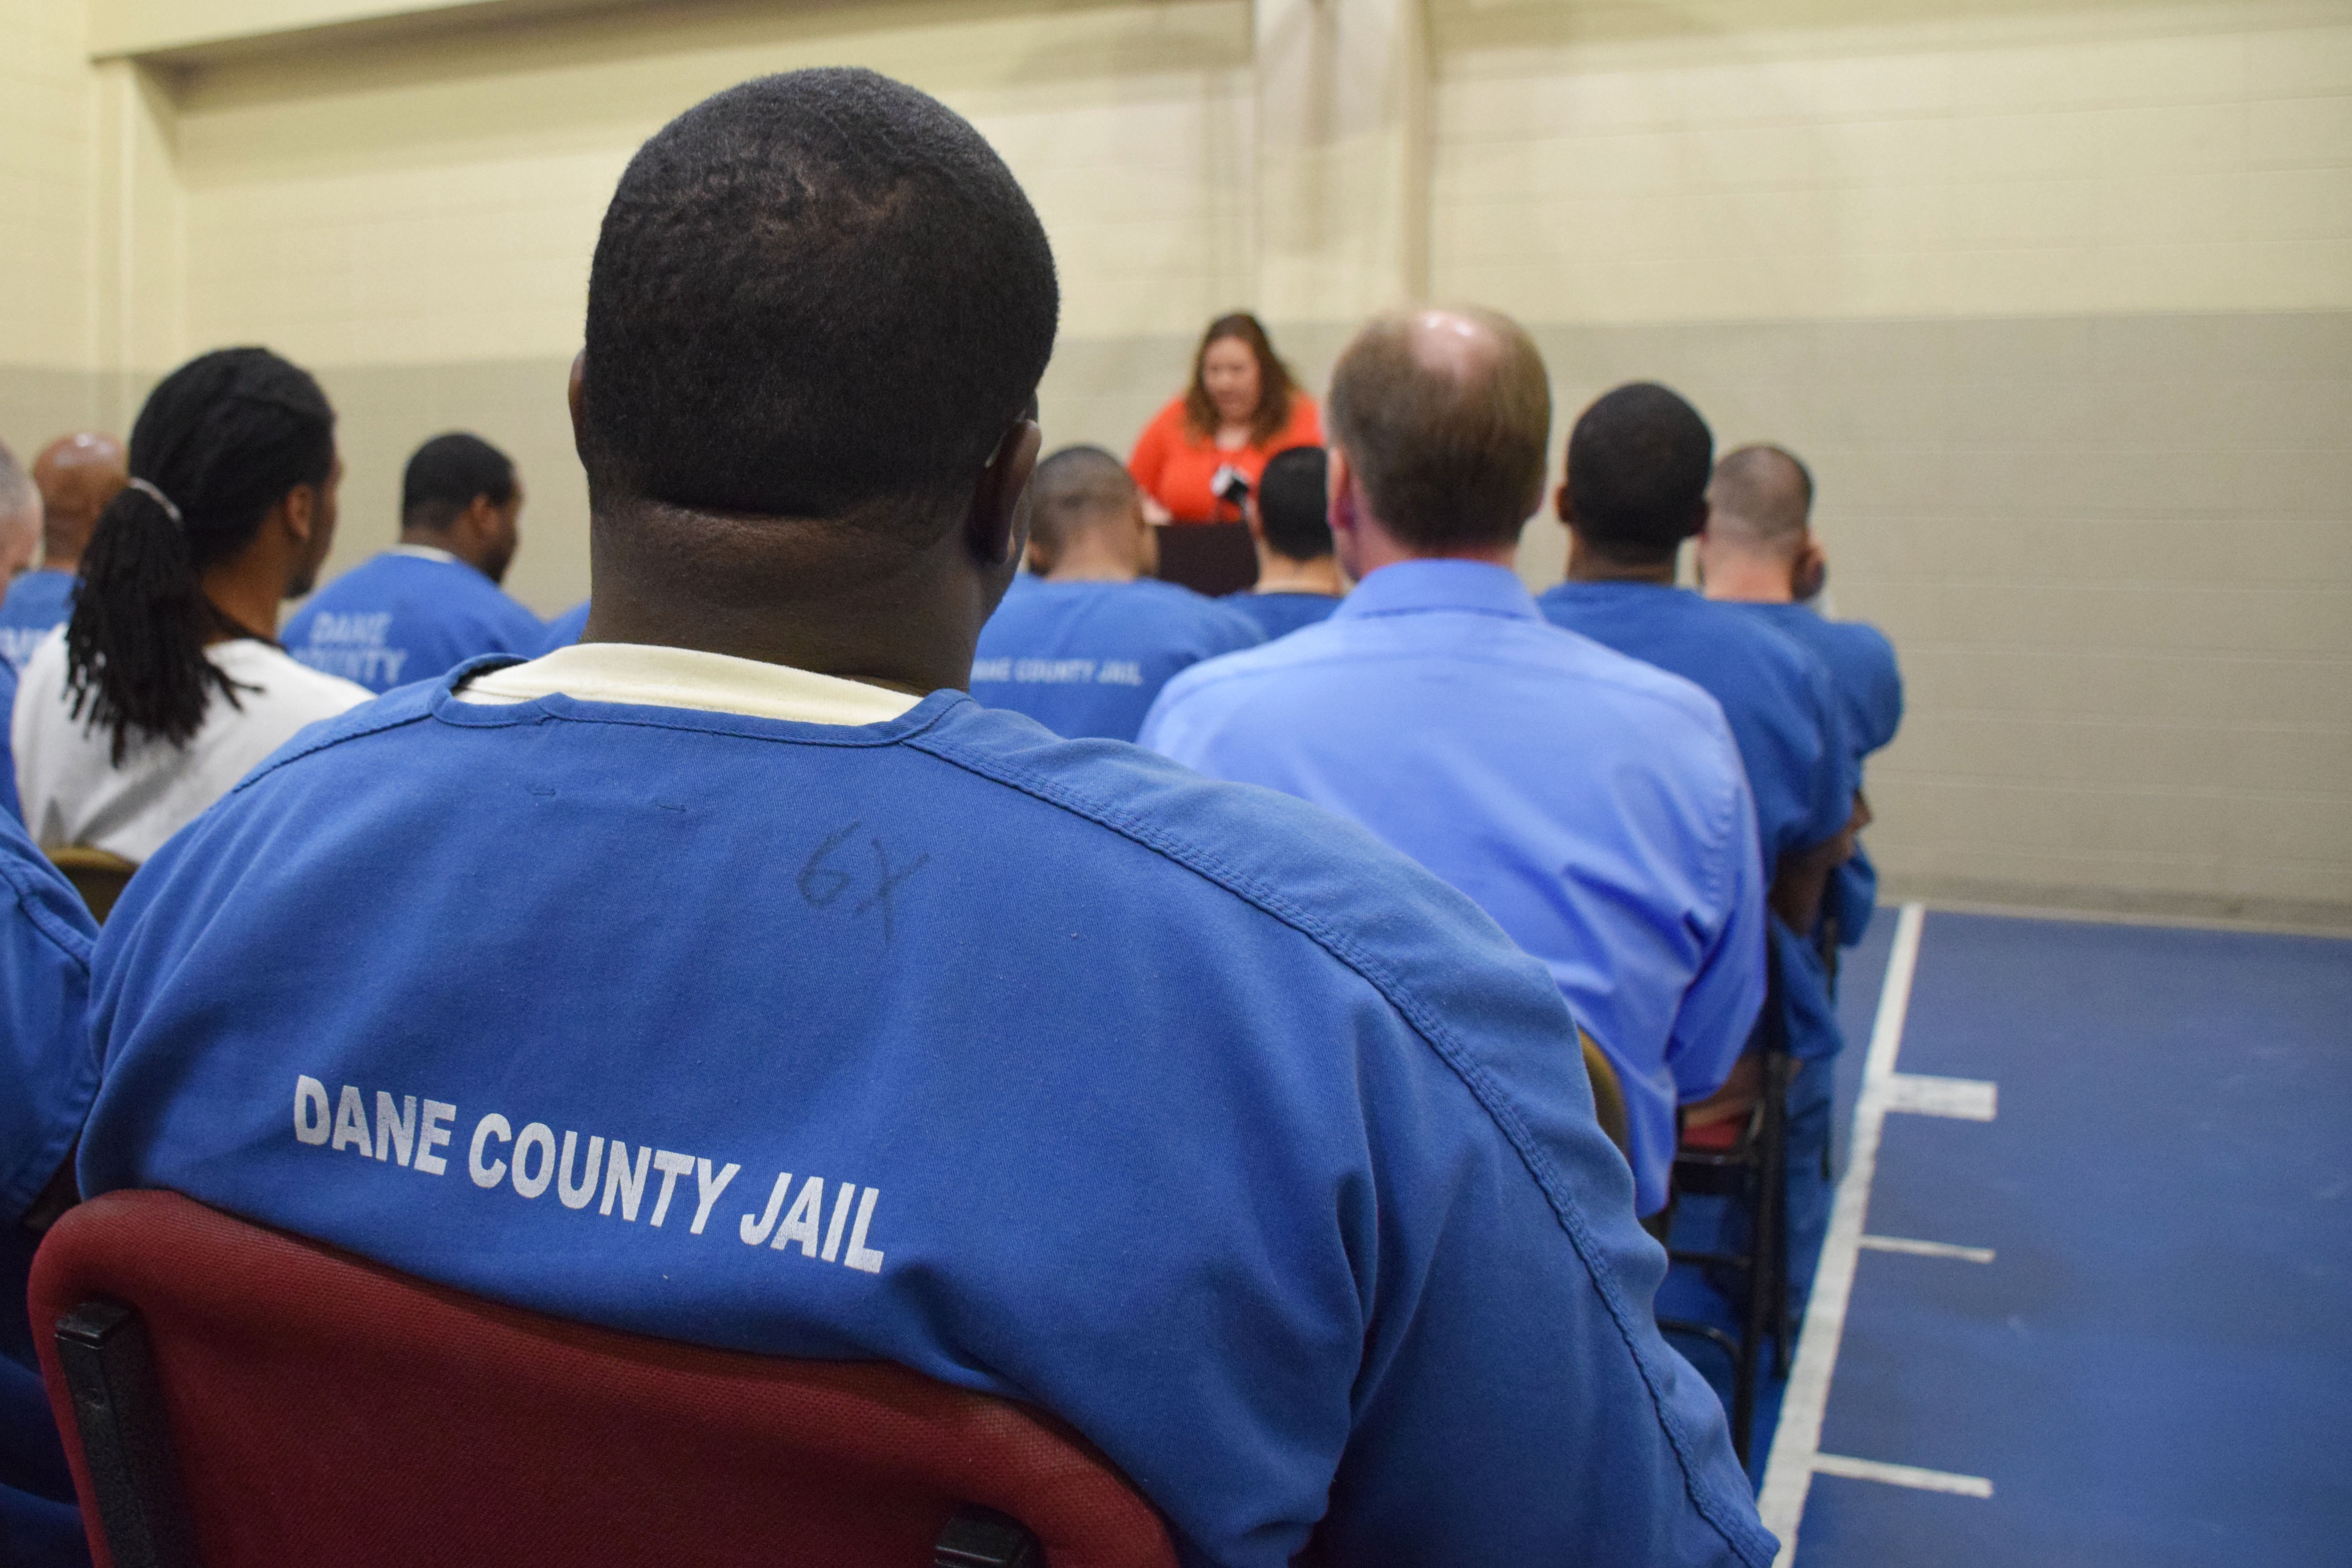 The inmates at the Dane County Jail celebrate their graduation from the Windows to Work program.